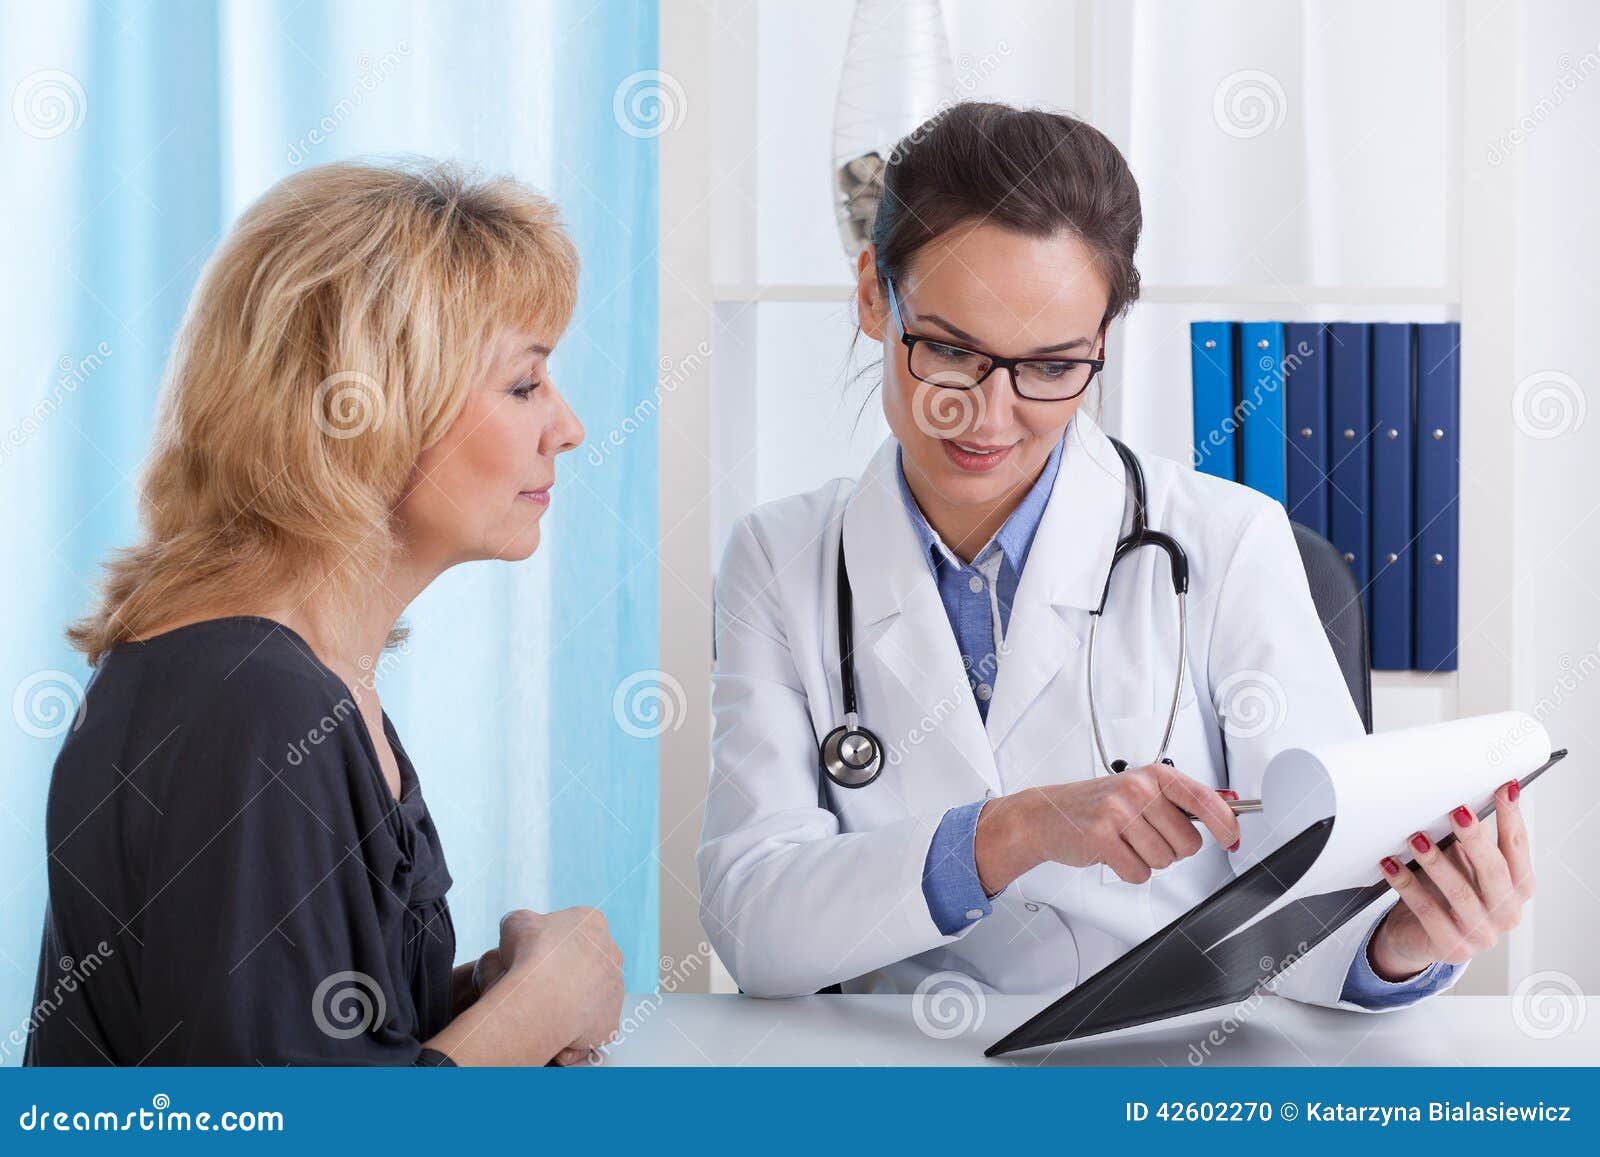 doctor showing patient test results